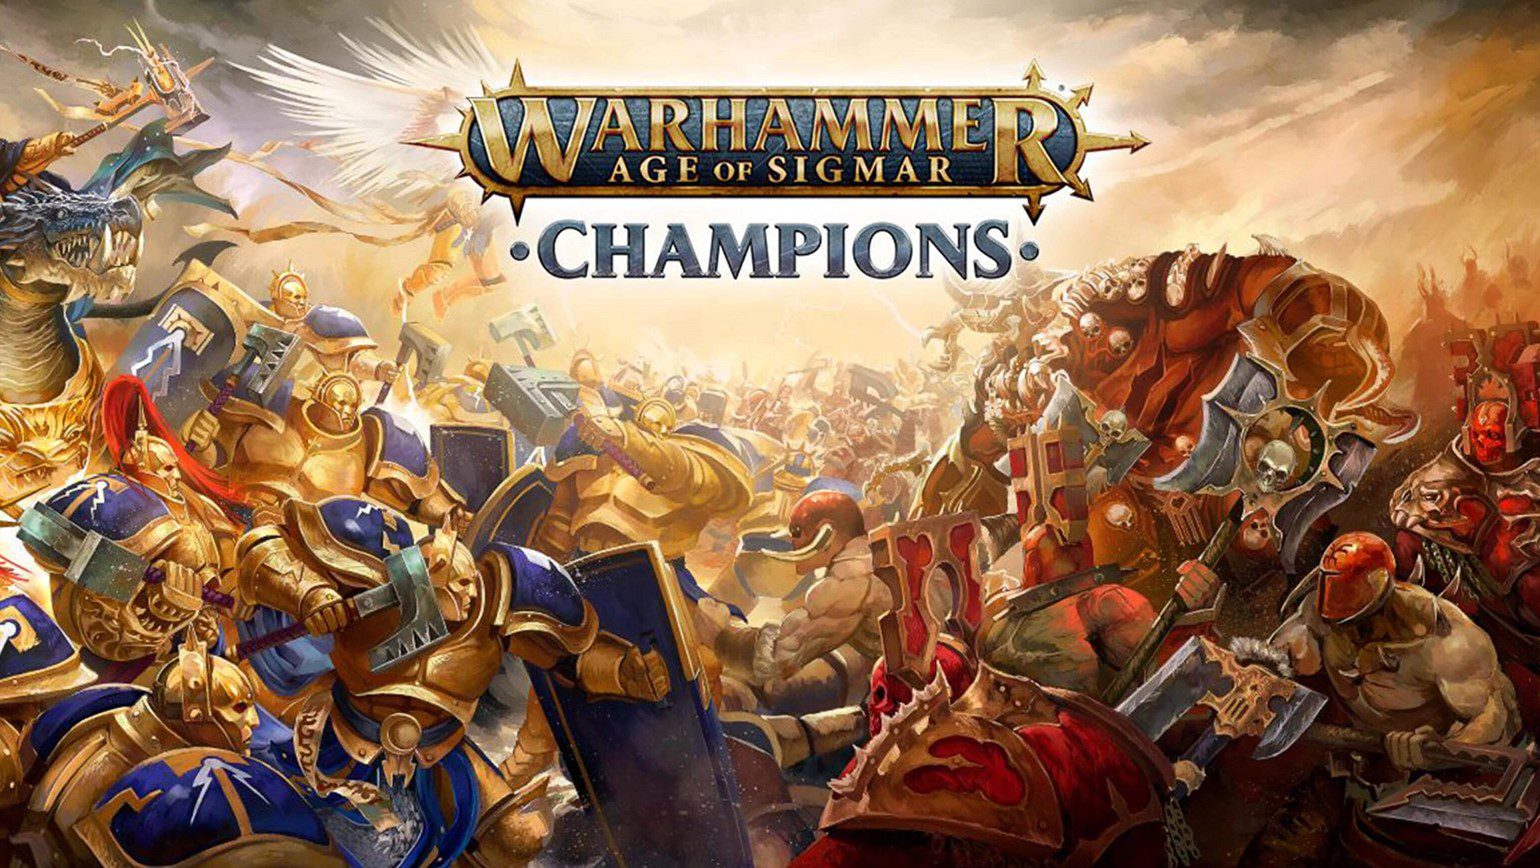 Warhammer Age of Sigmar: Champions heading to Nintendo Switch & Steam